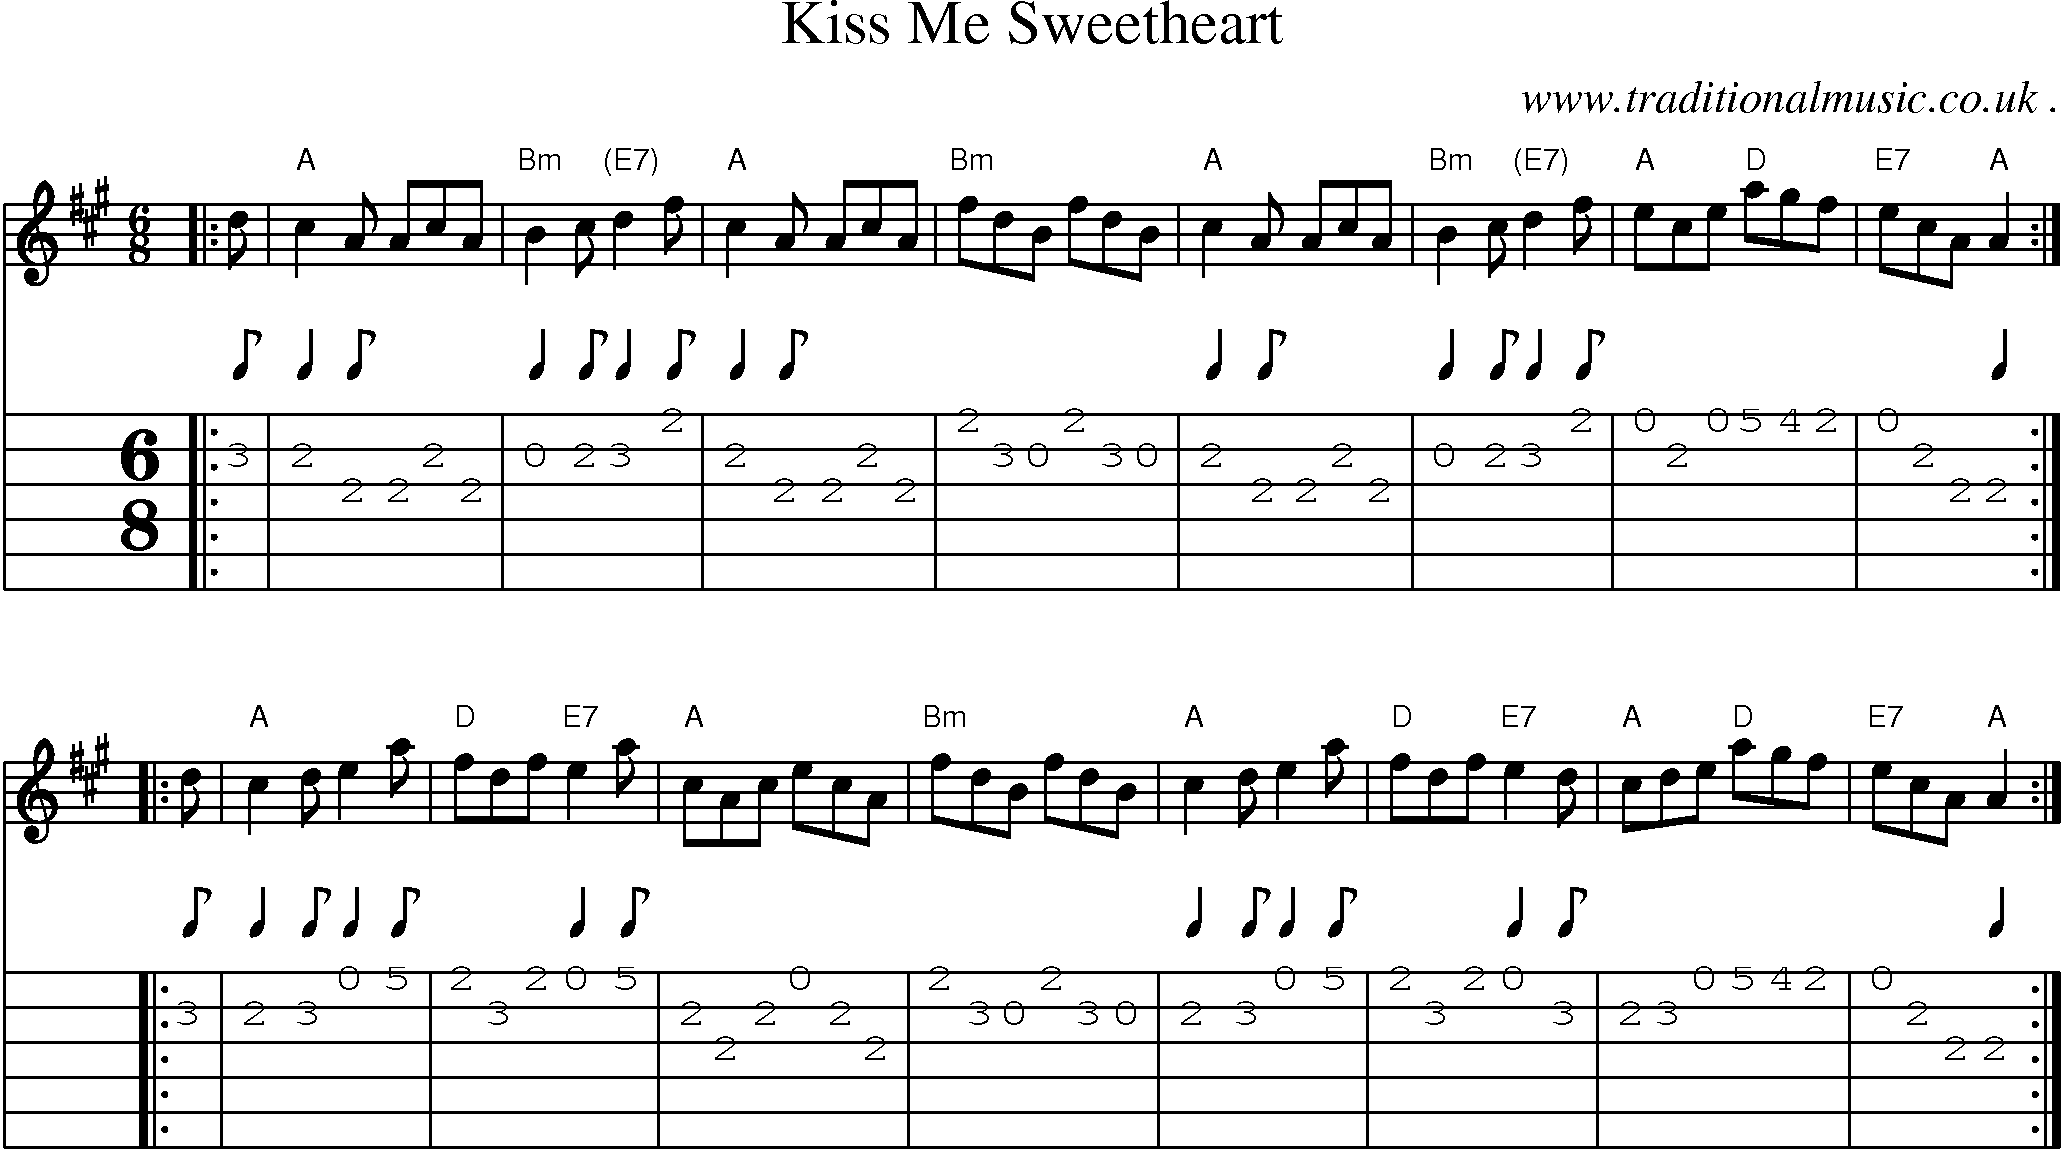 Sheet-music  score, Chords and Guitar Tabs for Kiss Me Sweetheart